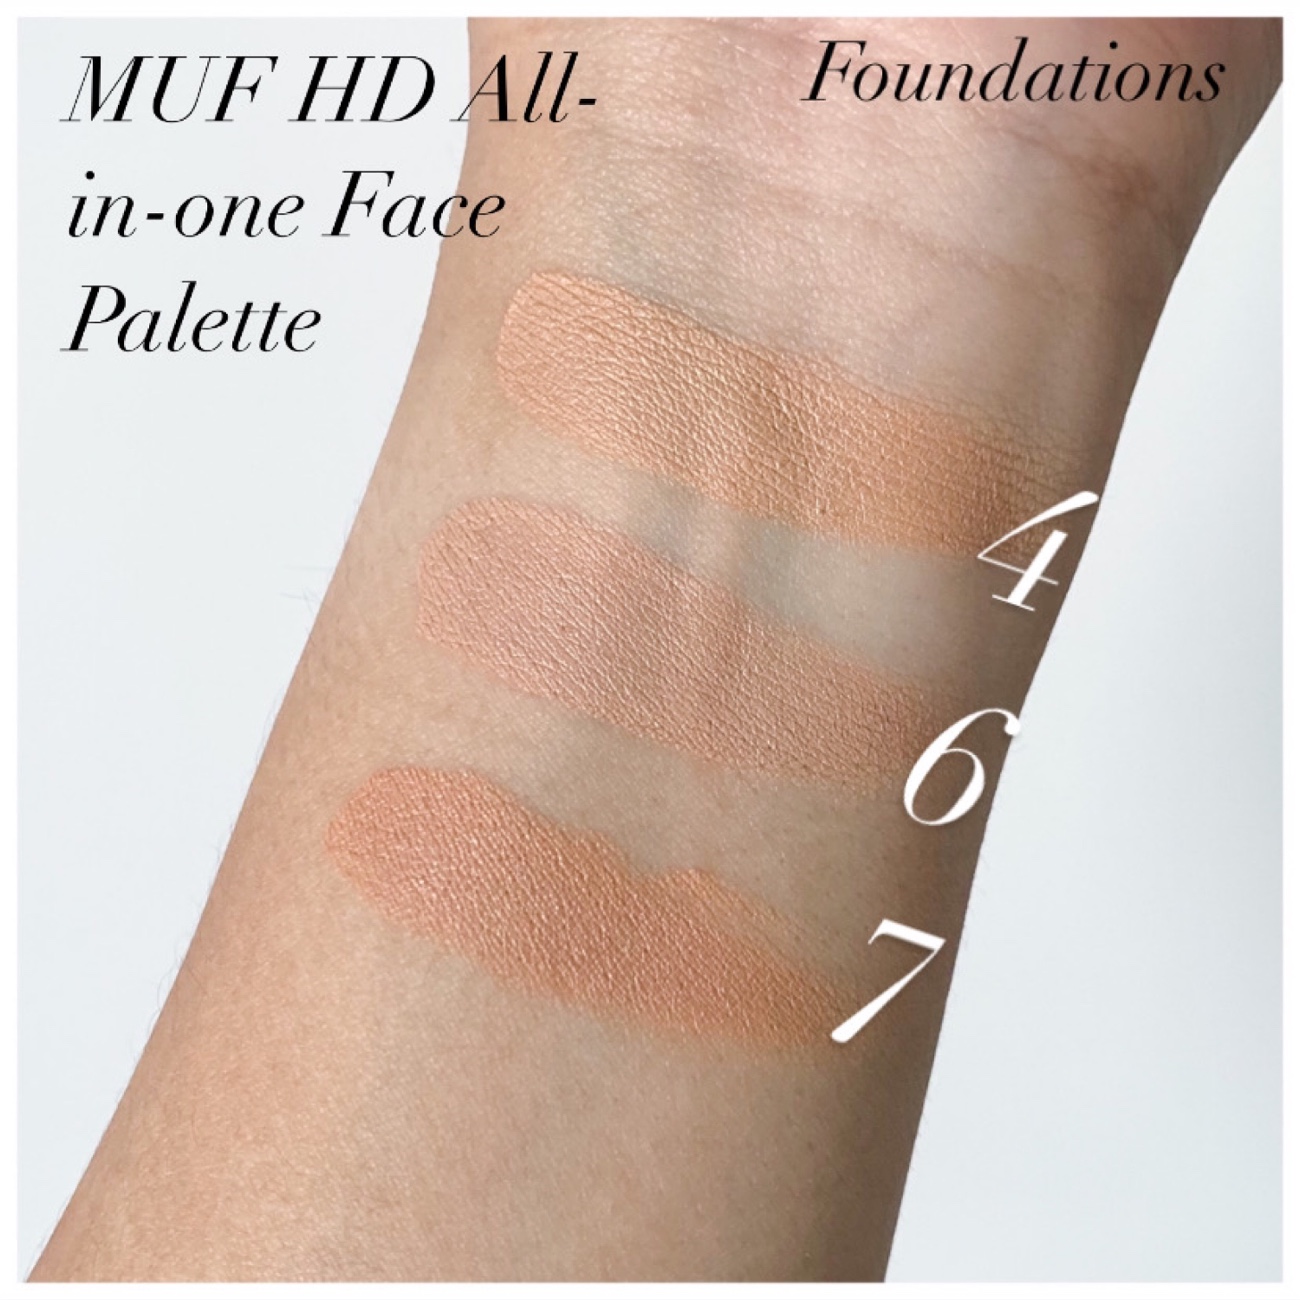 I Tried the MAKE UP FOR EVER All-in-One Cream Makeup Palette Going